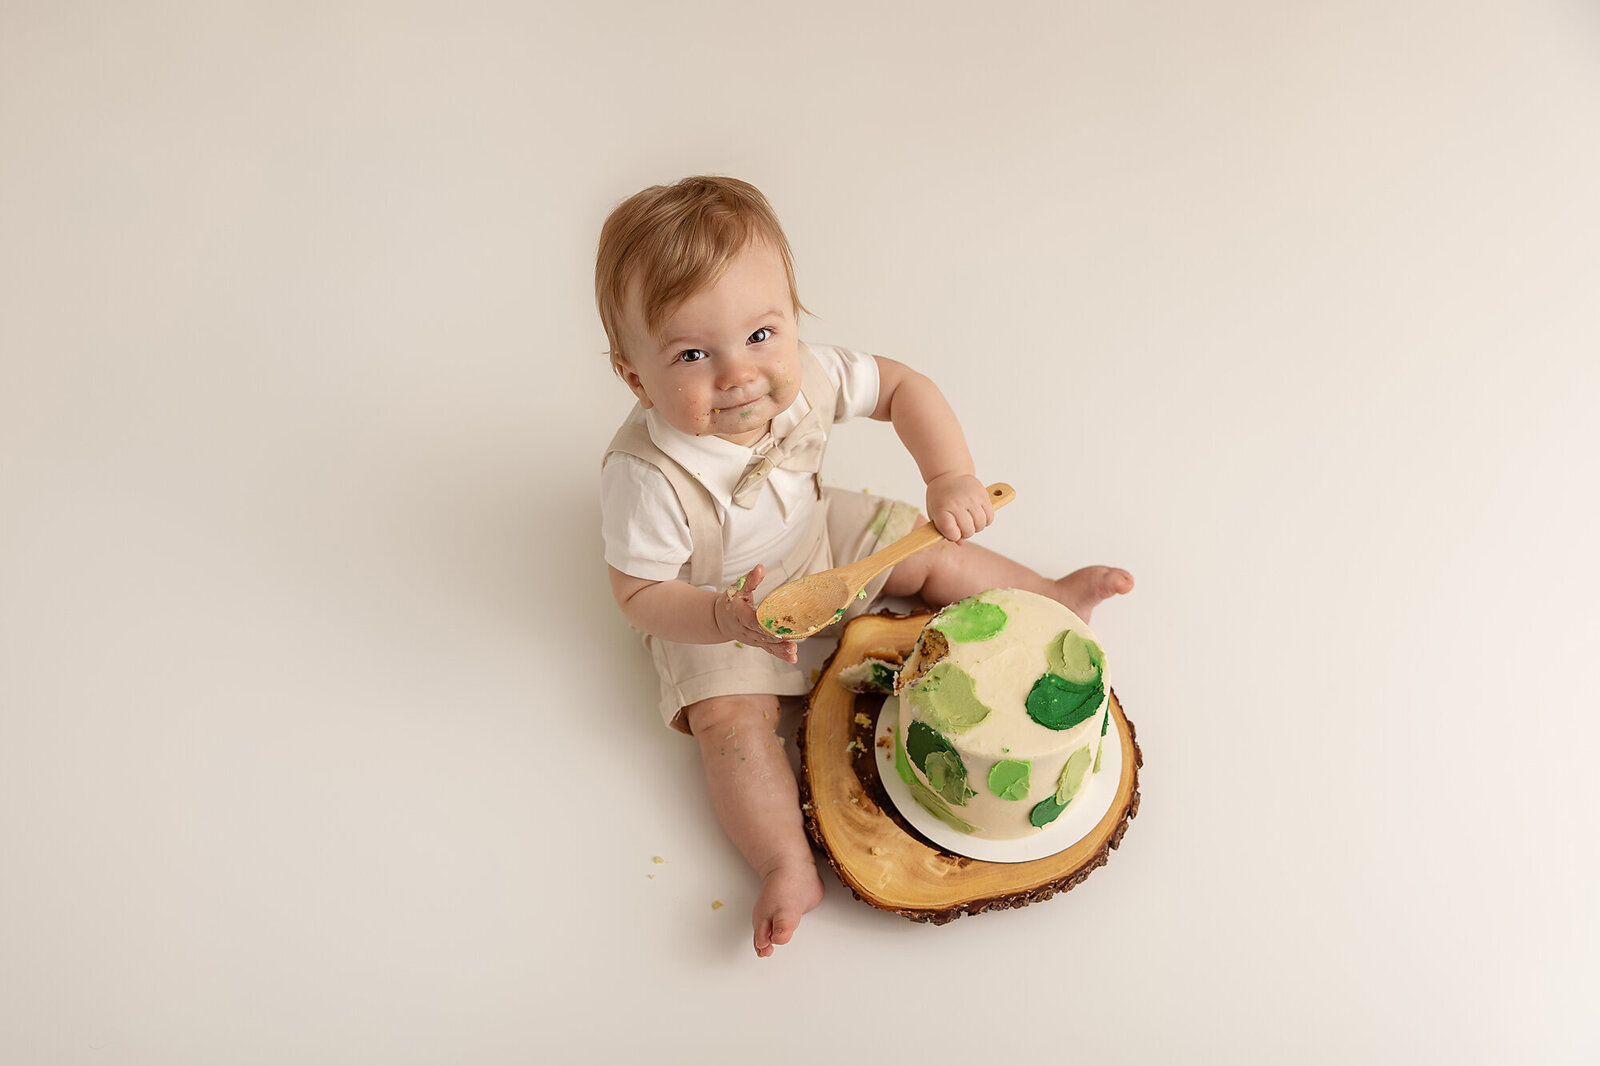 overhead view of boy eating cake